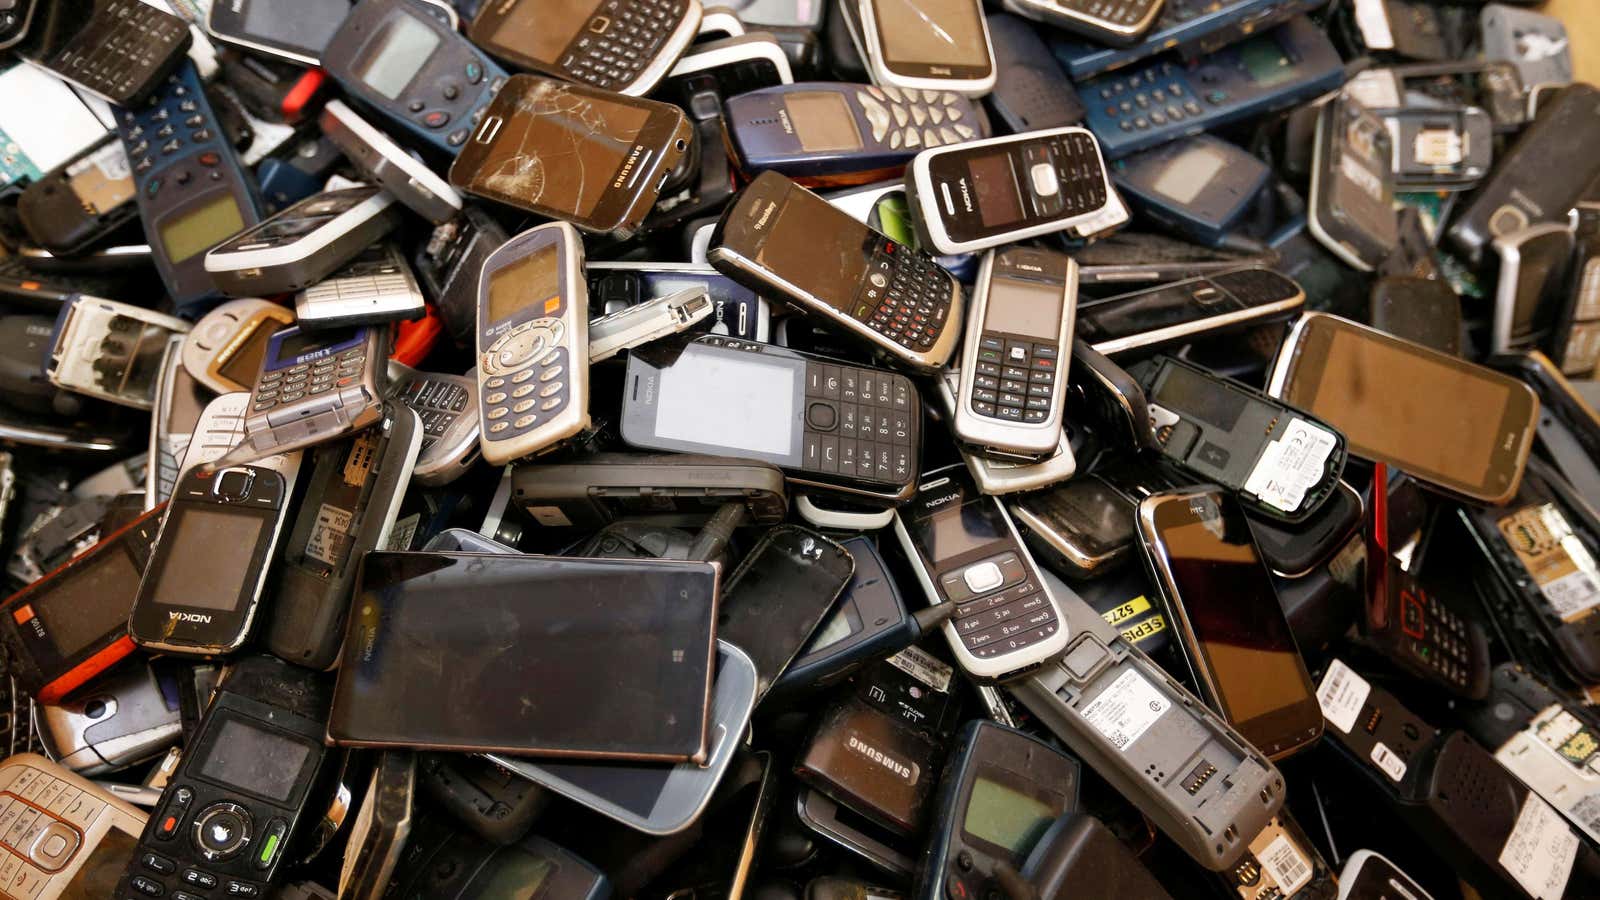 France has banned all cell phones in schools